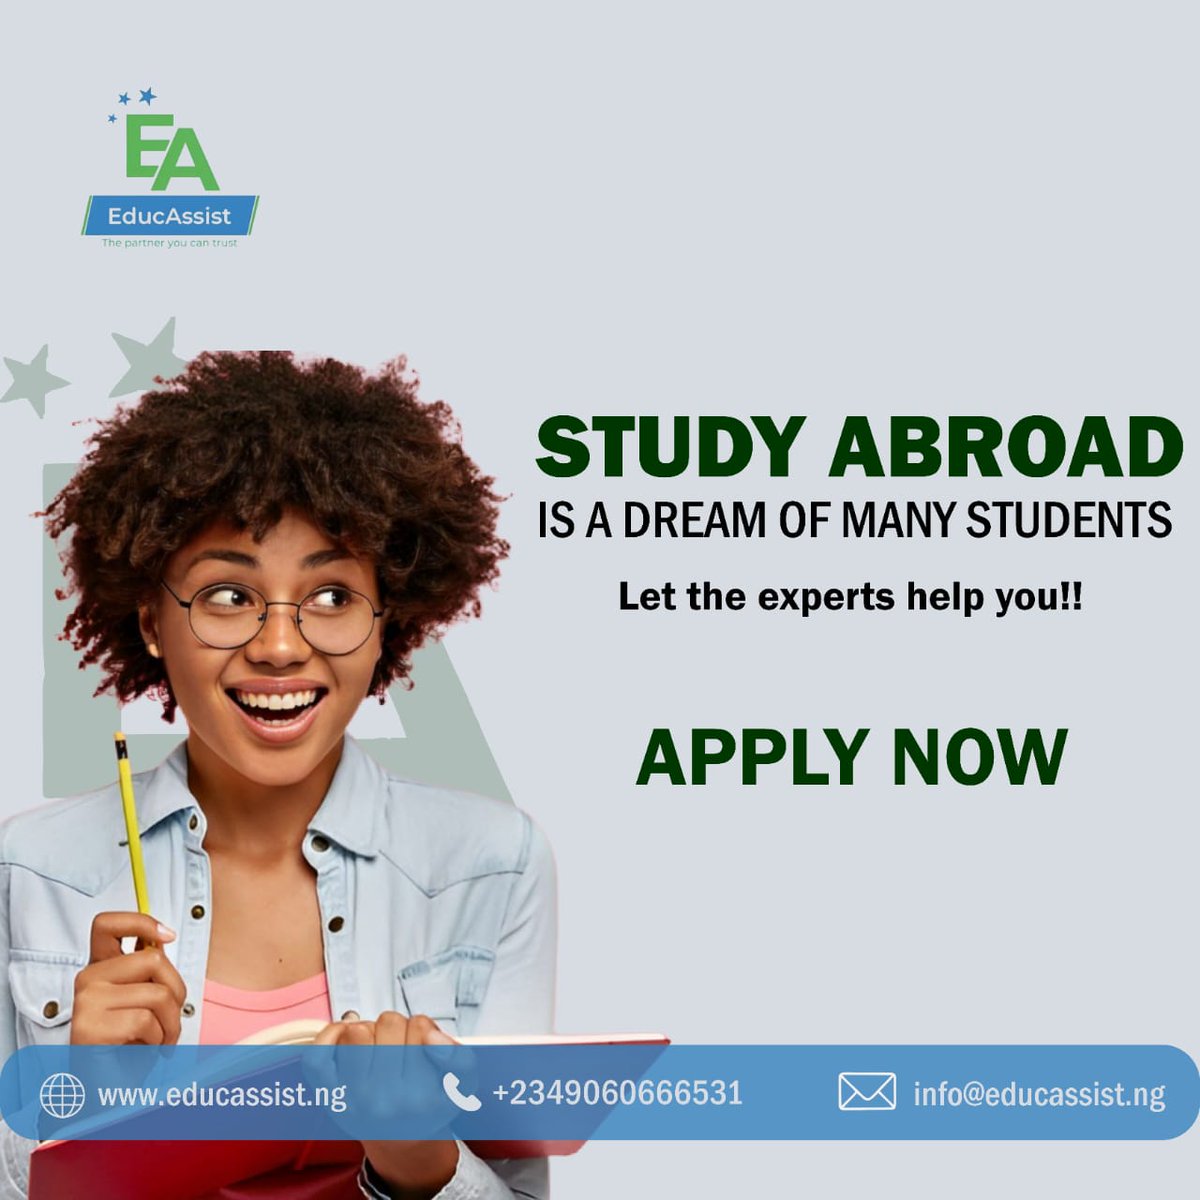 Students dream of studying abroad for academic opportunities, cultural immersion, language acquisition, personal development, career advantages, and travel experiences.

#educationconsultancy
#Scholarships